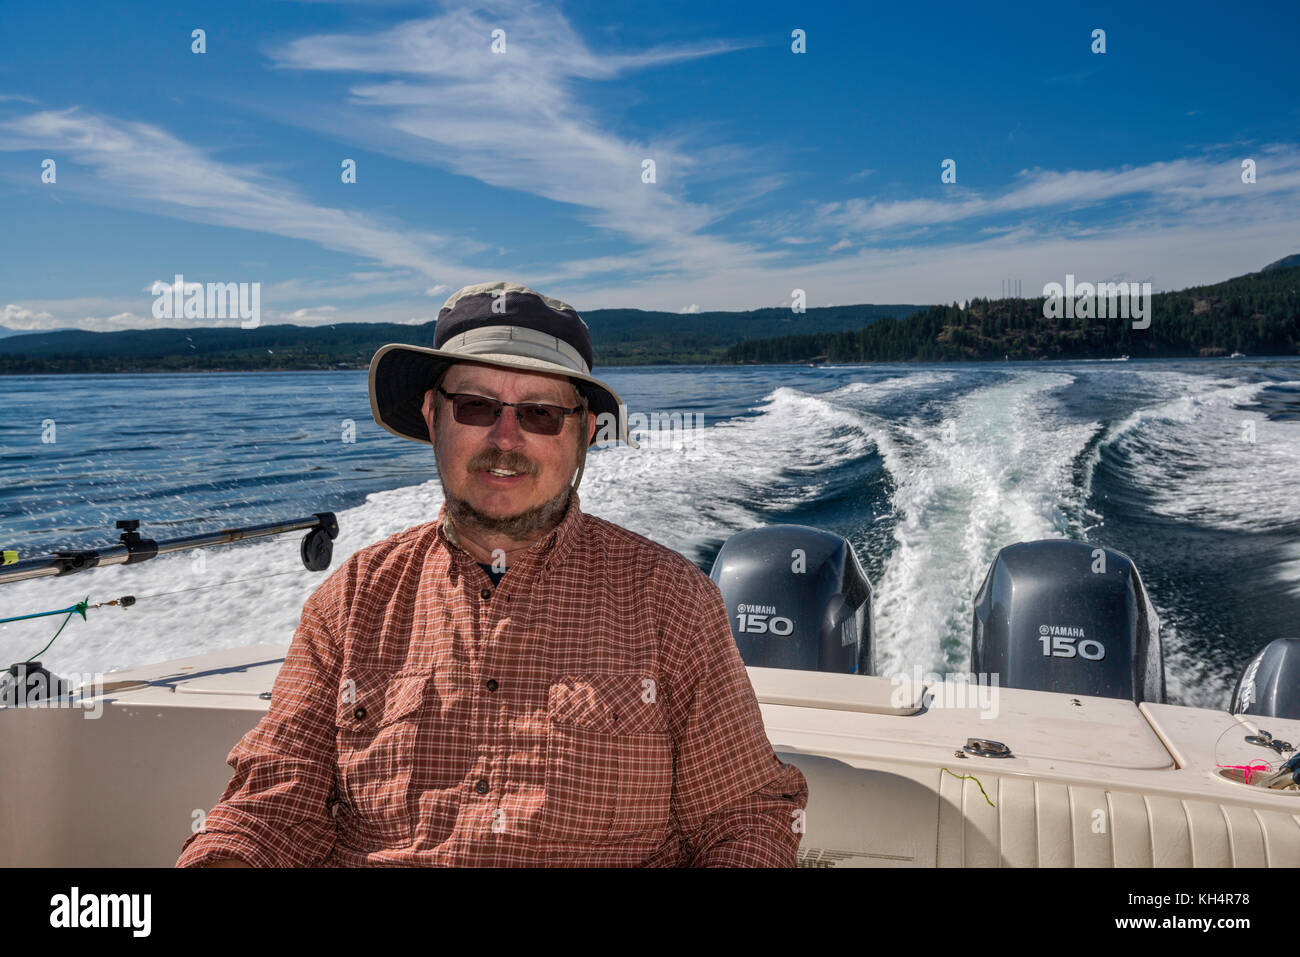 Middle-aged man sitting in a speedboat, returning from a fishing trip, in Johnstone Strait off Vancouver Island, British Columbia, Canada Stock Photo